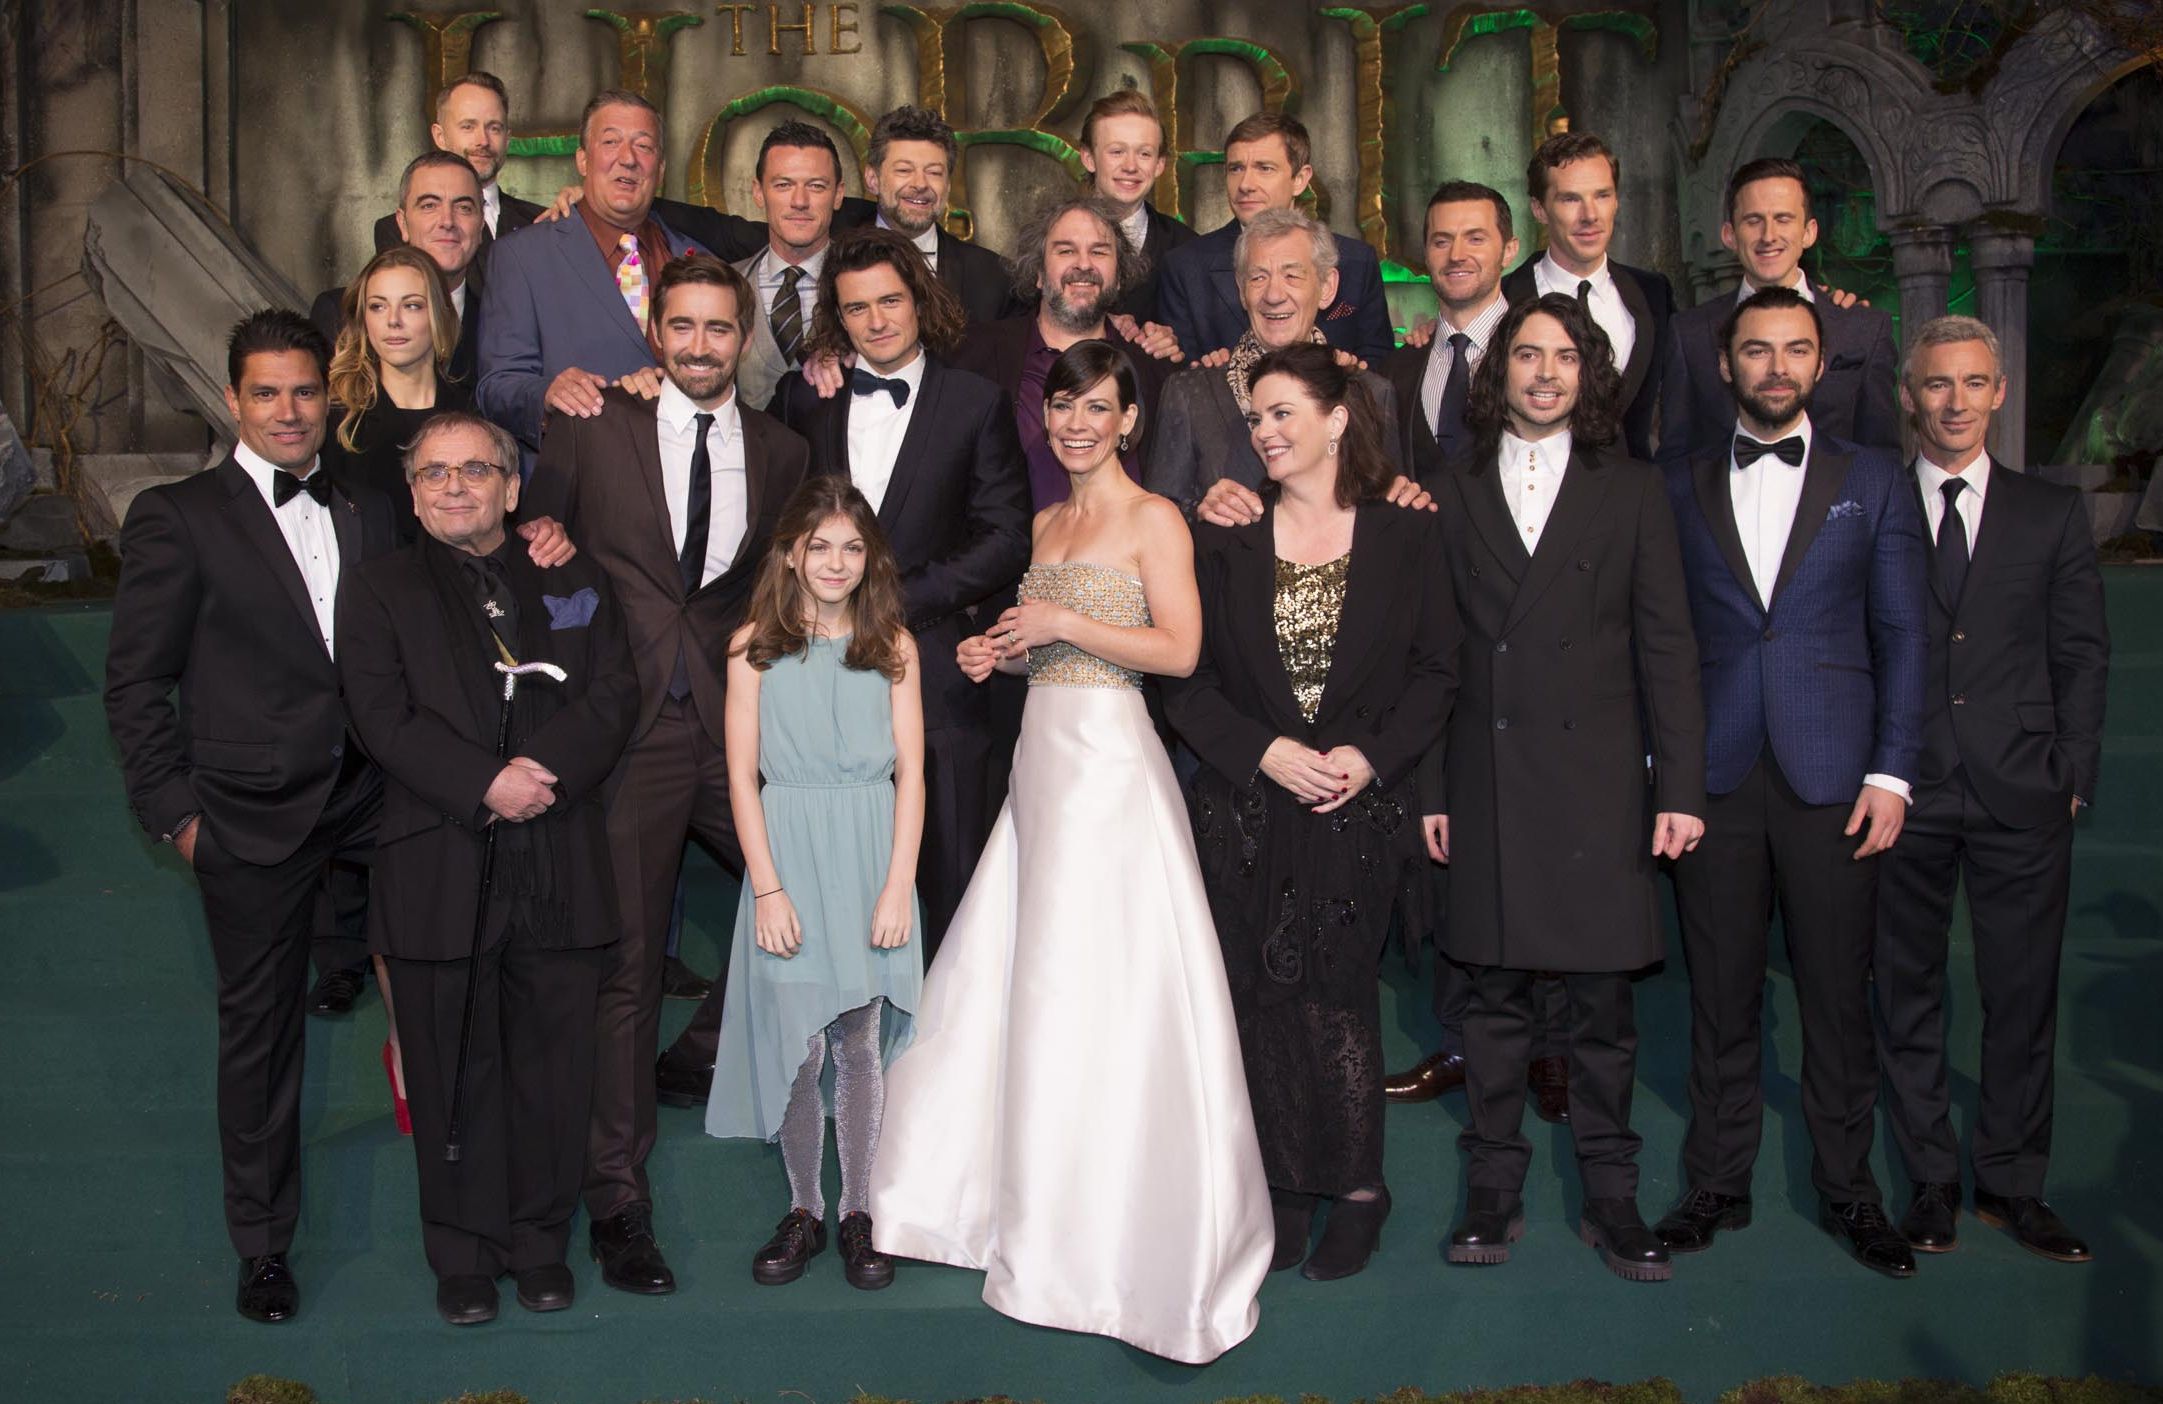 The Hobbit: The Battle of the Five Armies premiere cast and crew o